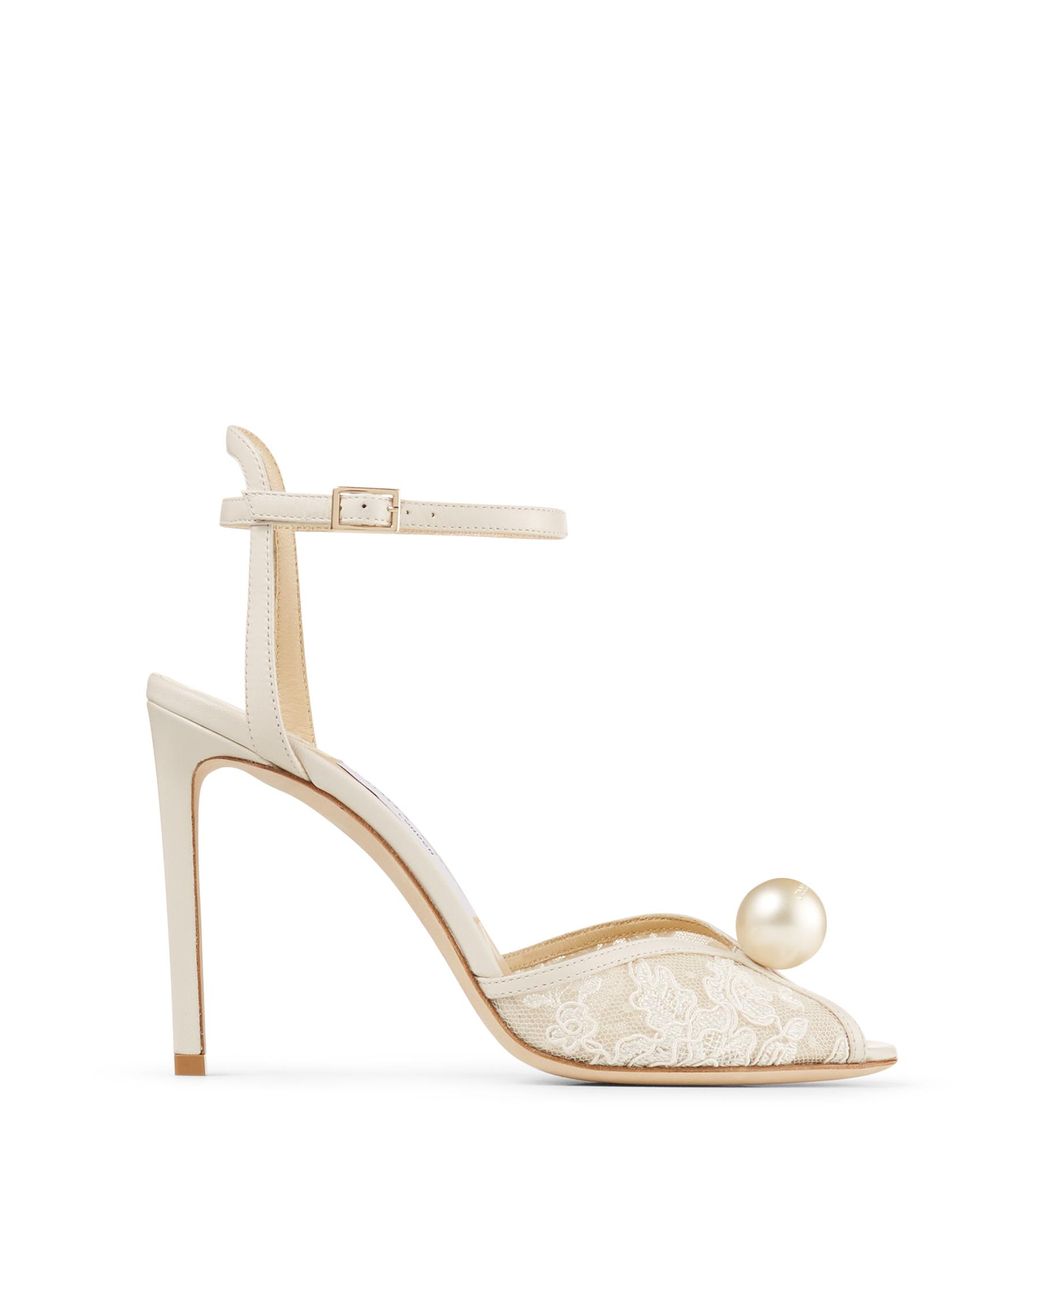 Jimmy Choo Sacora 100 Ivory Floral Lace Sandals With Pearl Detail ...